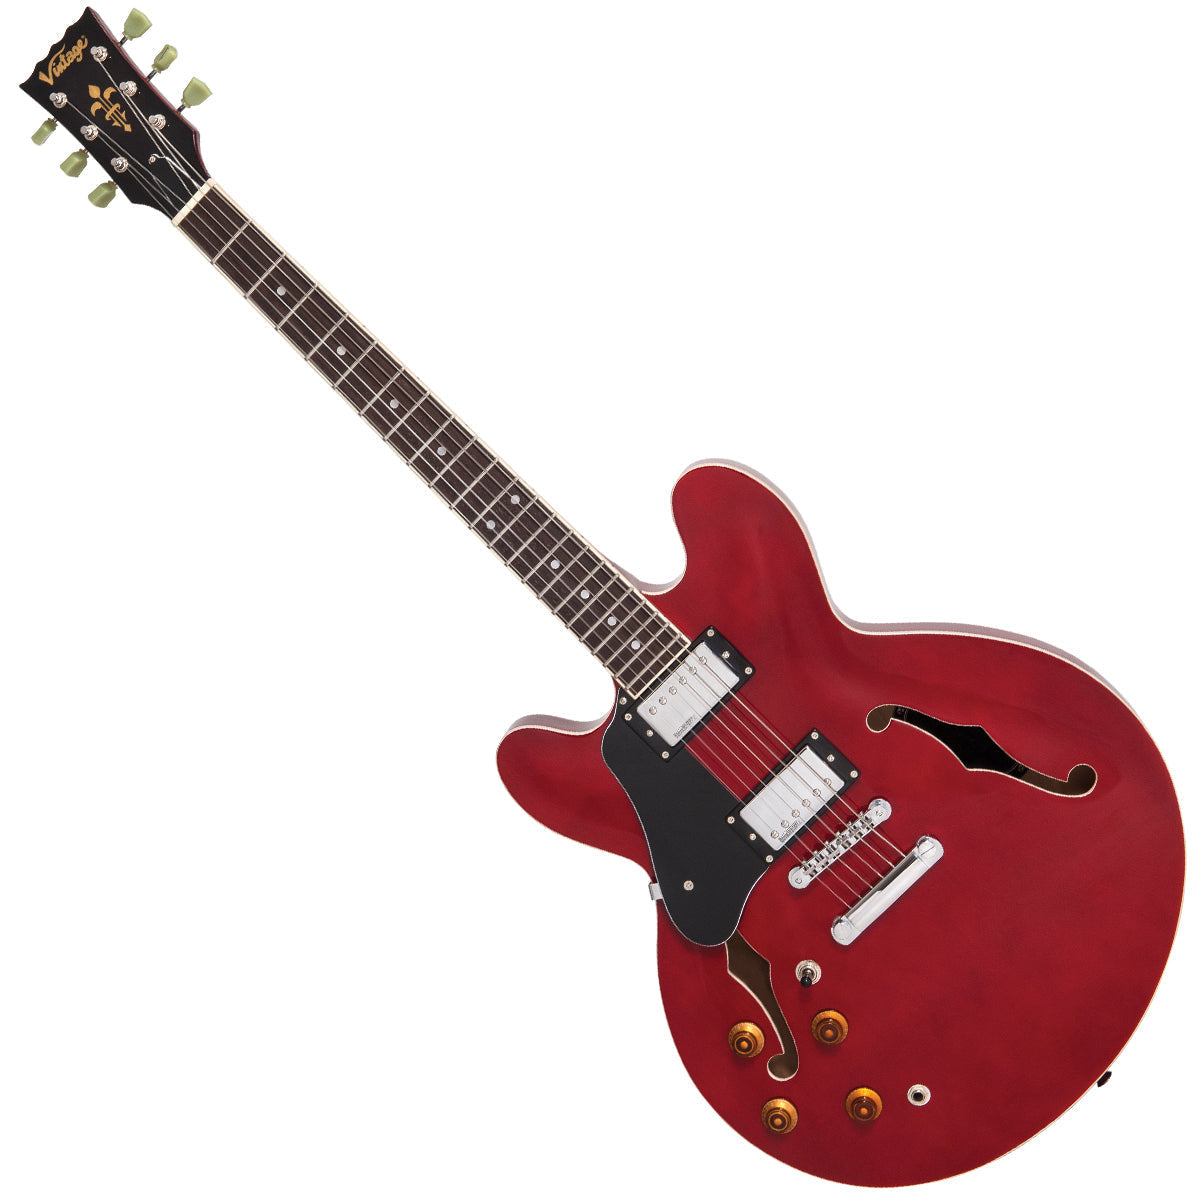 Vintage VSA500 ReIssued Semi Acoustic Guitar ~ Left Hand Cherry Red, Left Hand Electric Guitars for sale at Richards Guitars.